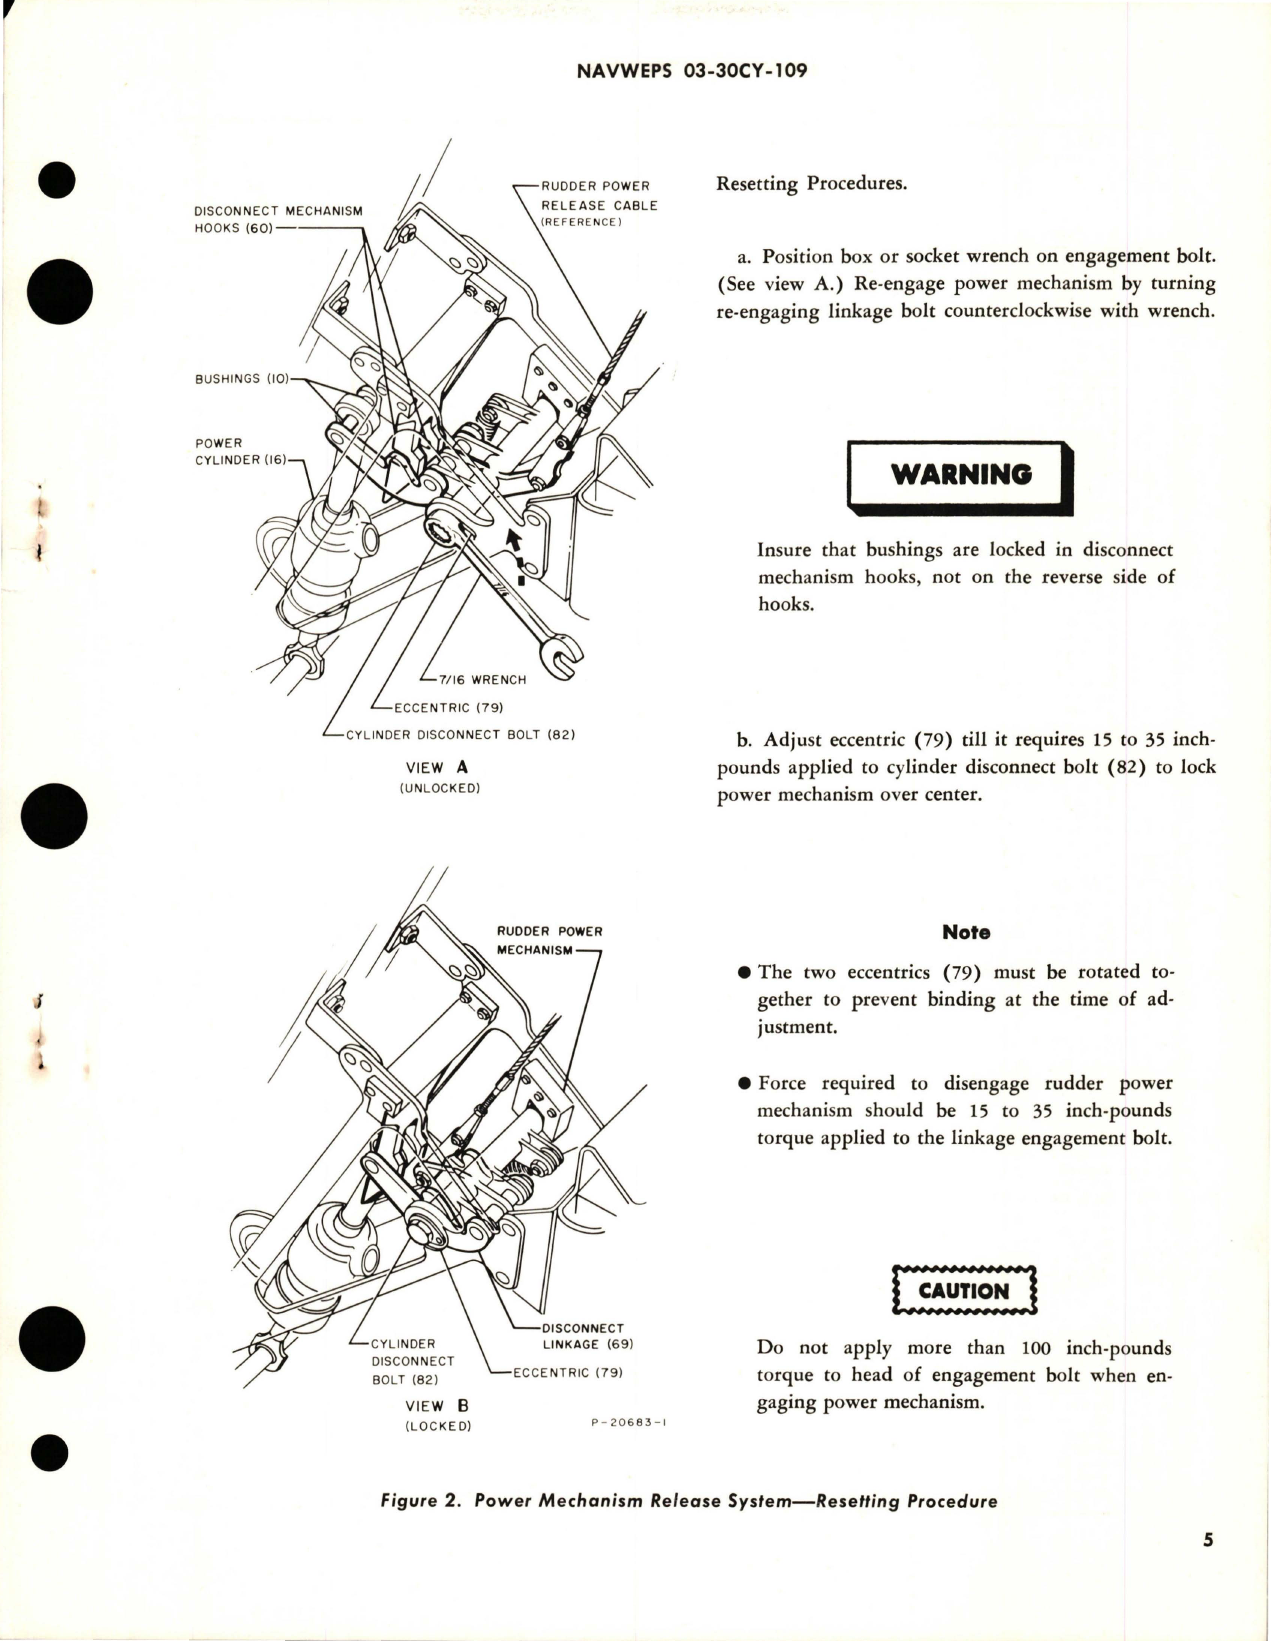 Sample page 5 from AirCorps Library document: Overhaul Instructions with Parts for Mechanism Assembly Rudder Power - 5550862-3 and 5550862-5